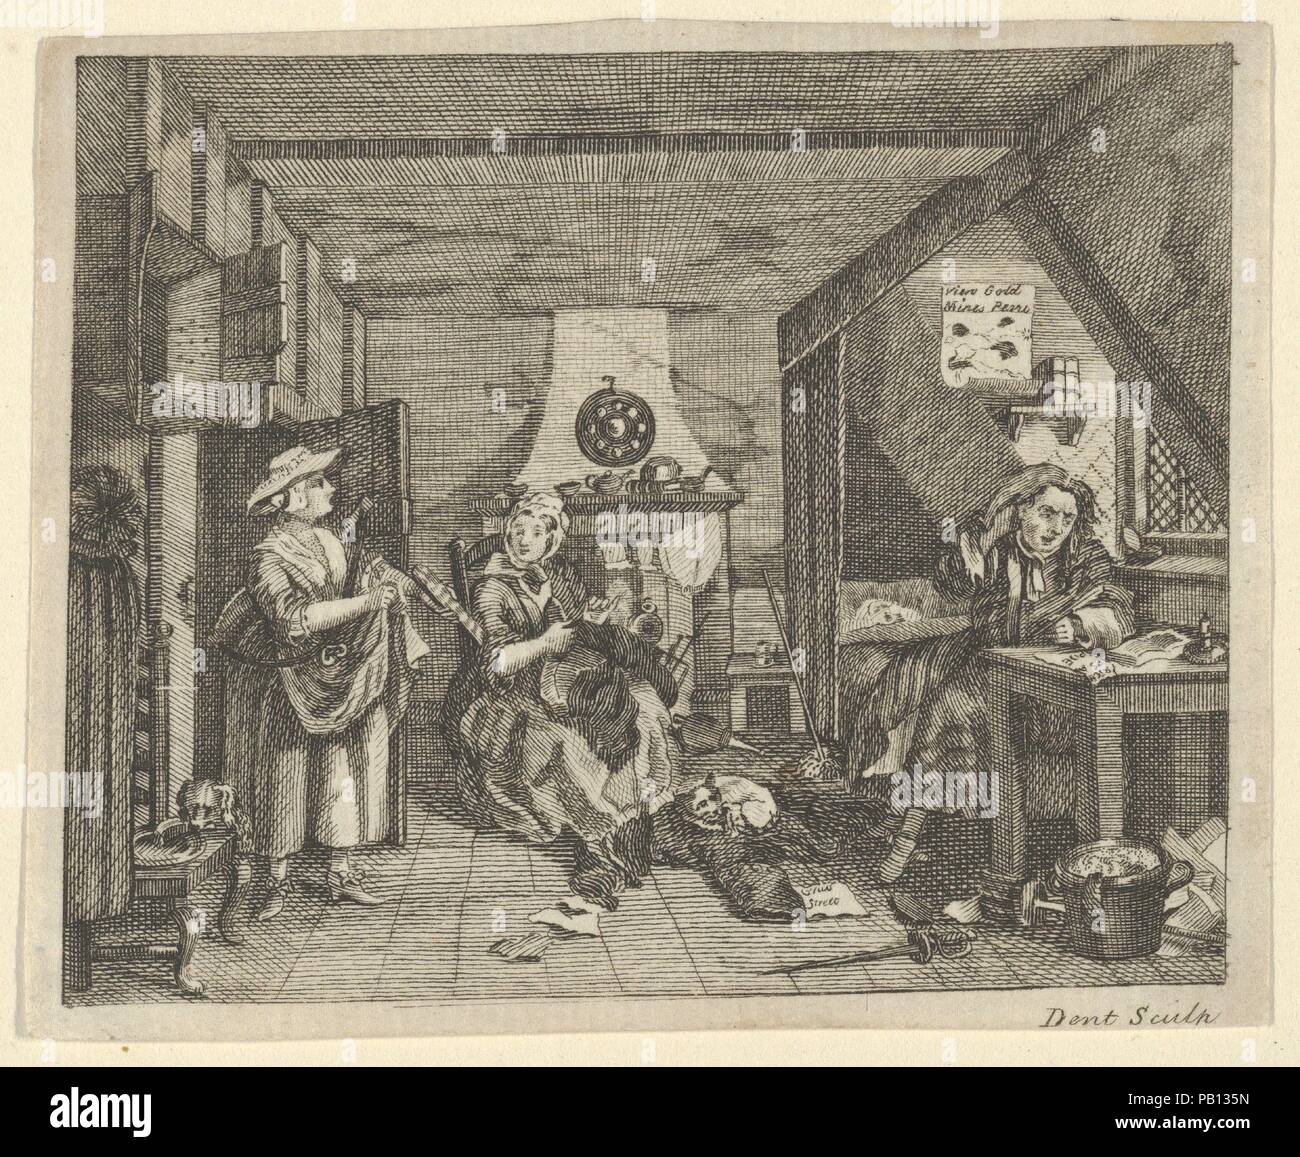 The Distressed Poet. Artist: After William Hogarth (British, London 1697-1764 London). Dimensions: Sheet: 2 11/16 x 3 1/4 in. (6.8 x 8.2 cm). Engraver: Dent (British, active ca. 1800). Date: ca. 1800. Museum: Metropolitan Museum of Art, New York, USA. Stock Photo